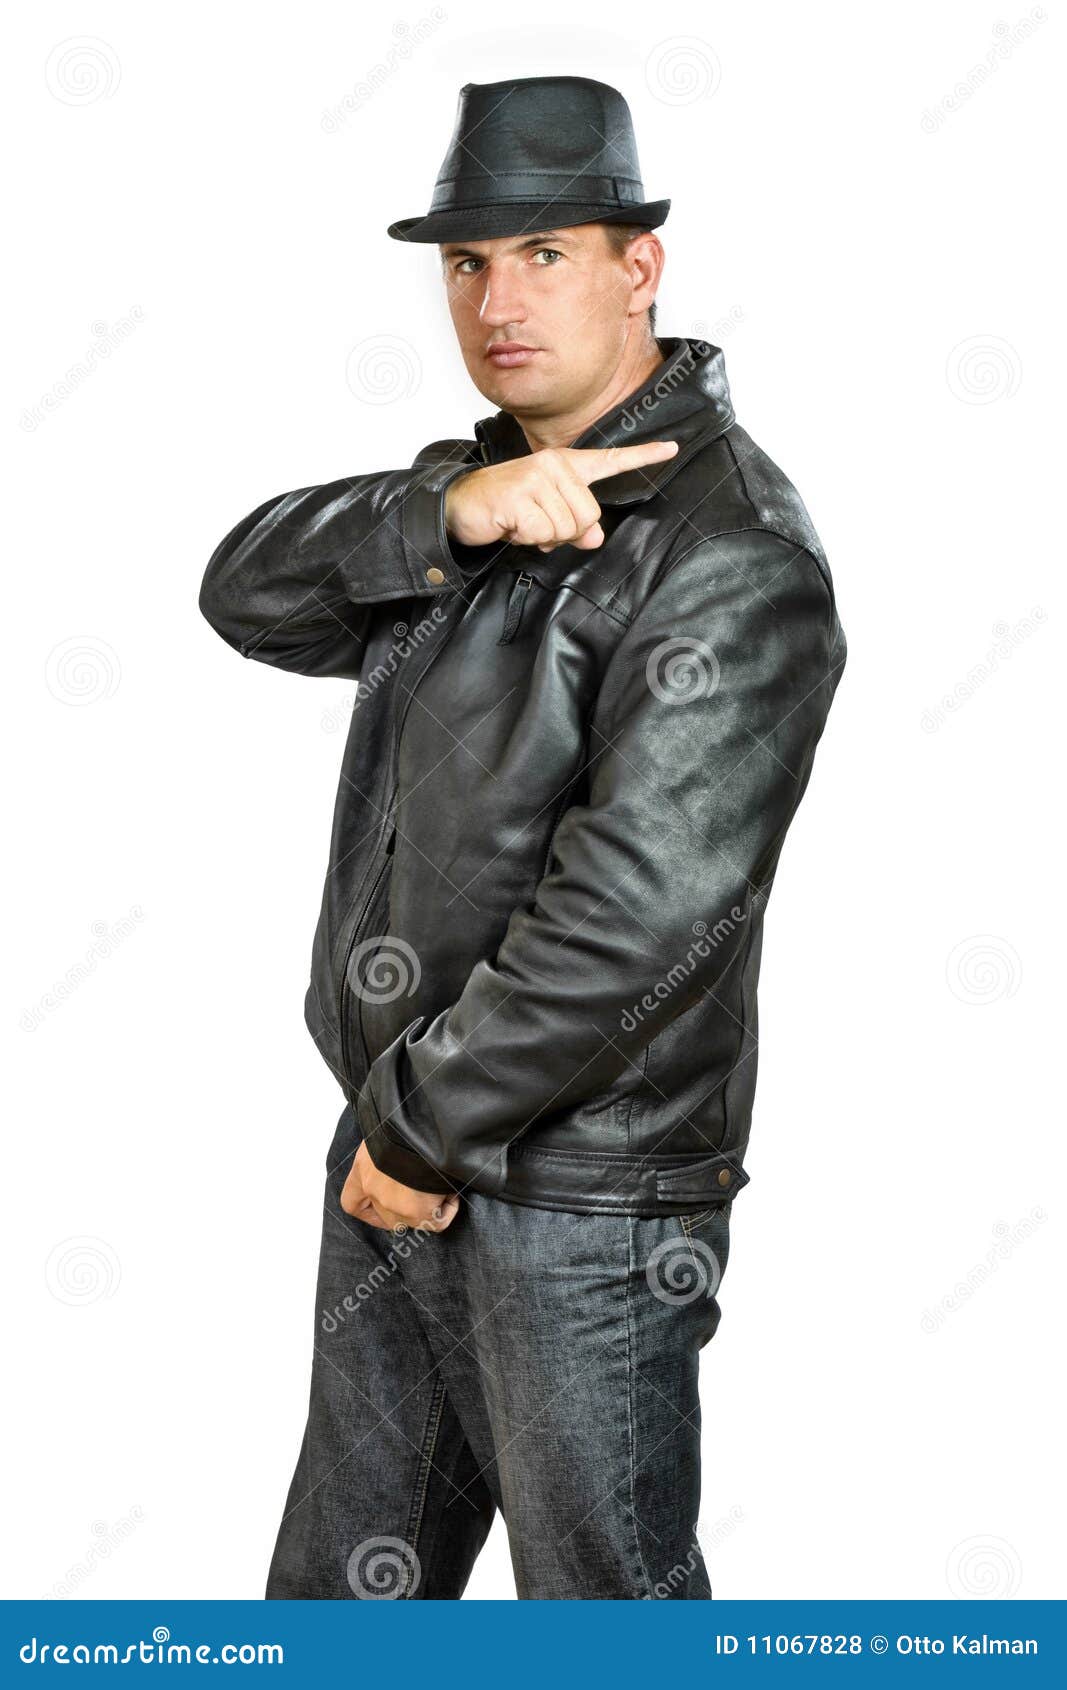 Gangster Man stock photo. Image of gangster, mafia, conflict - 11067828